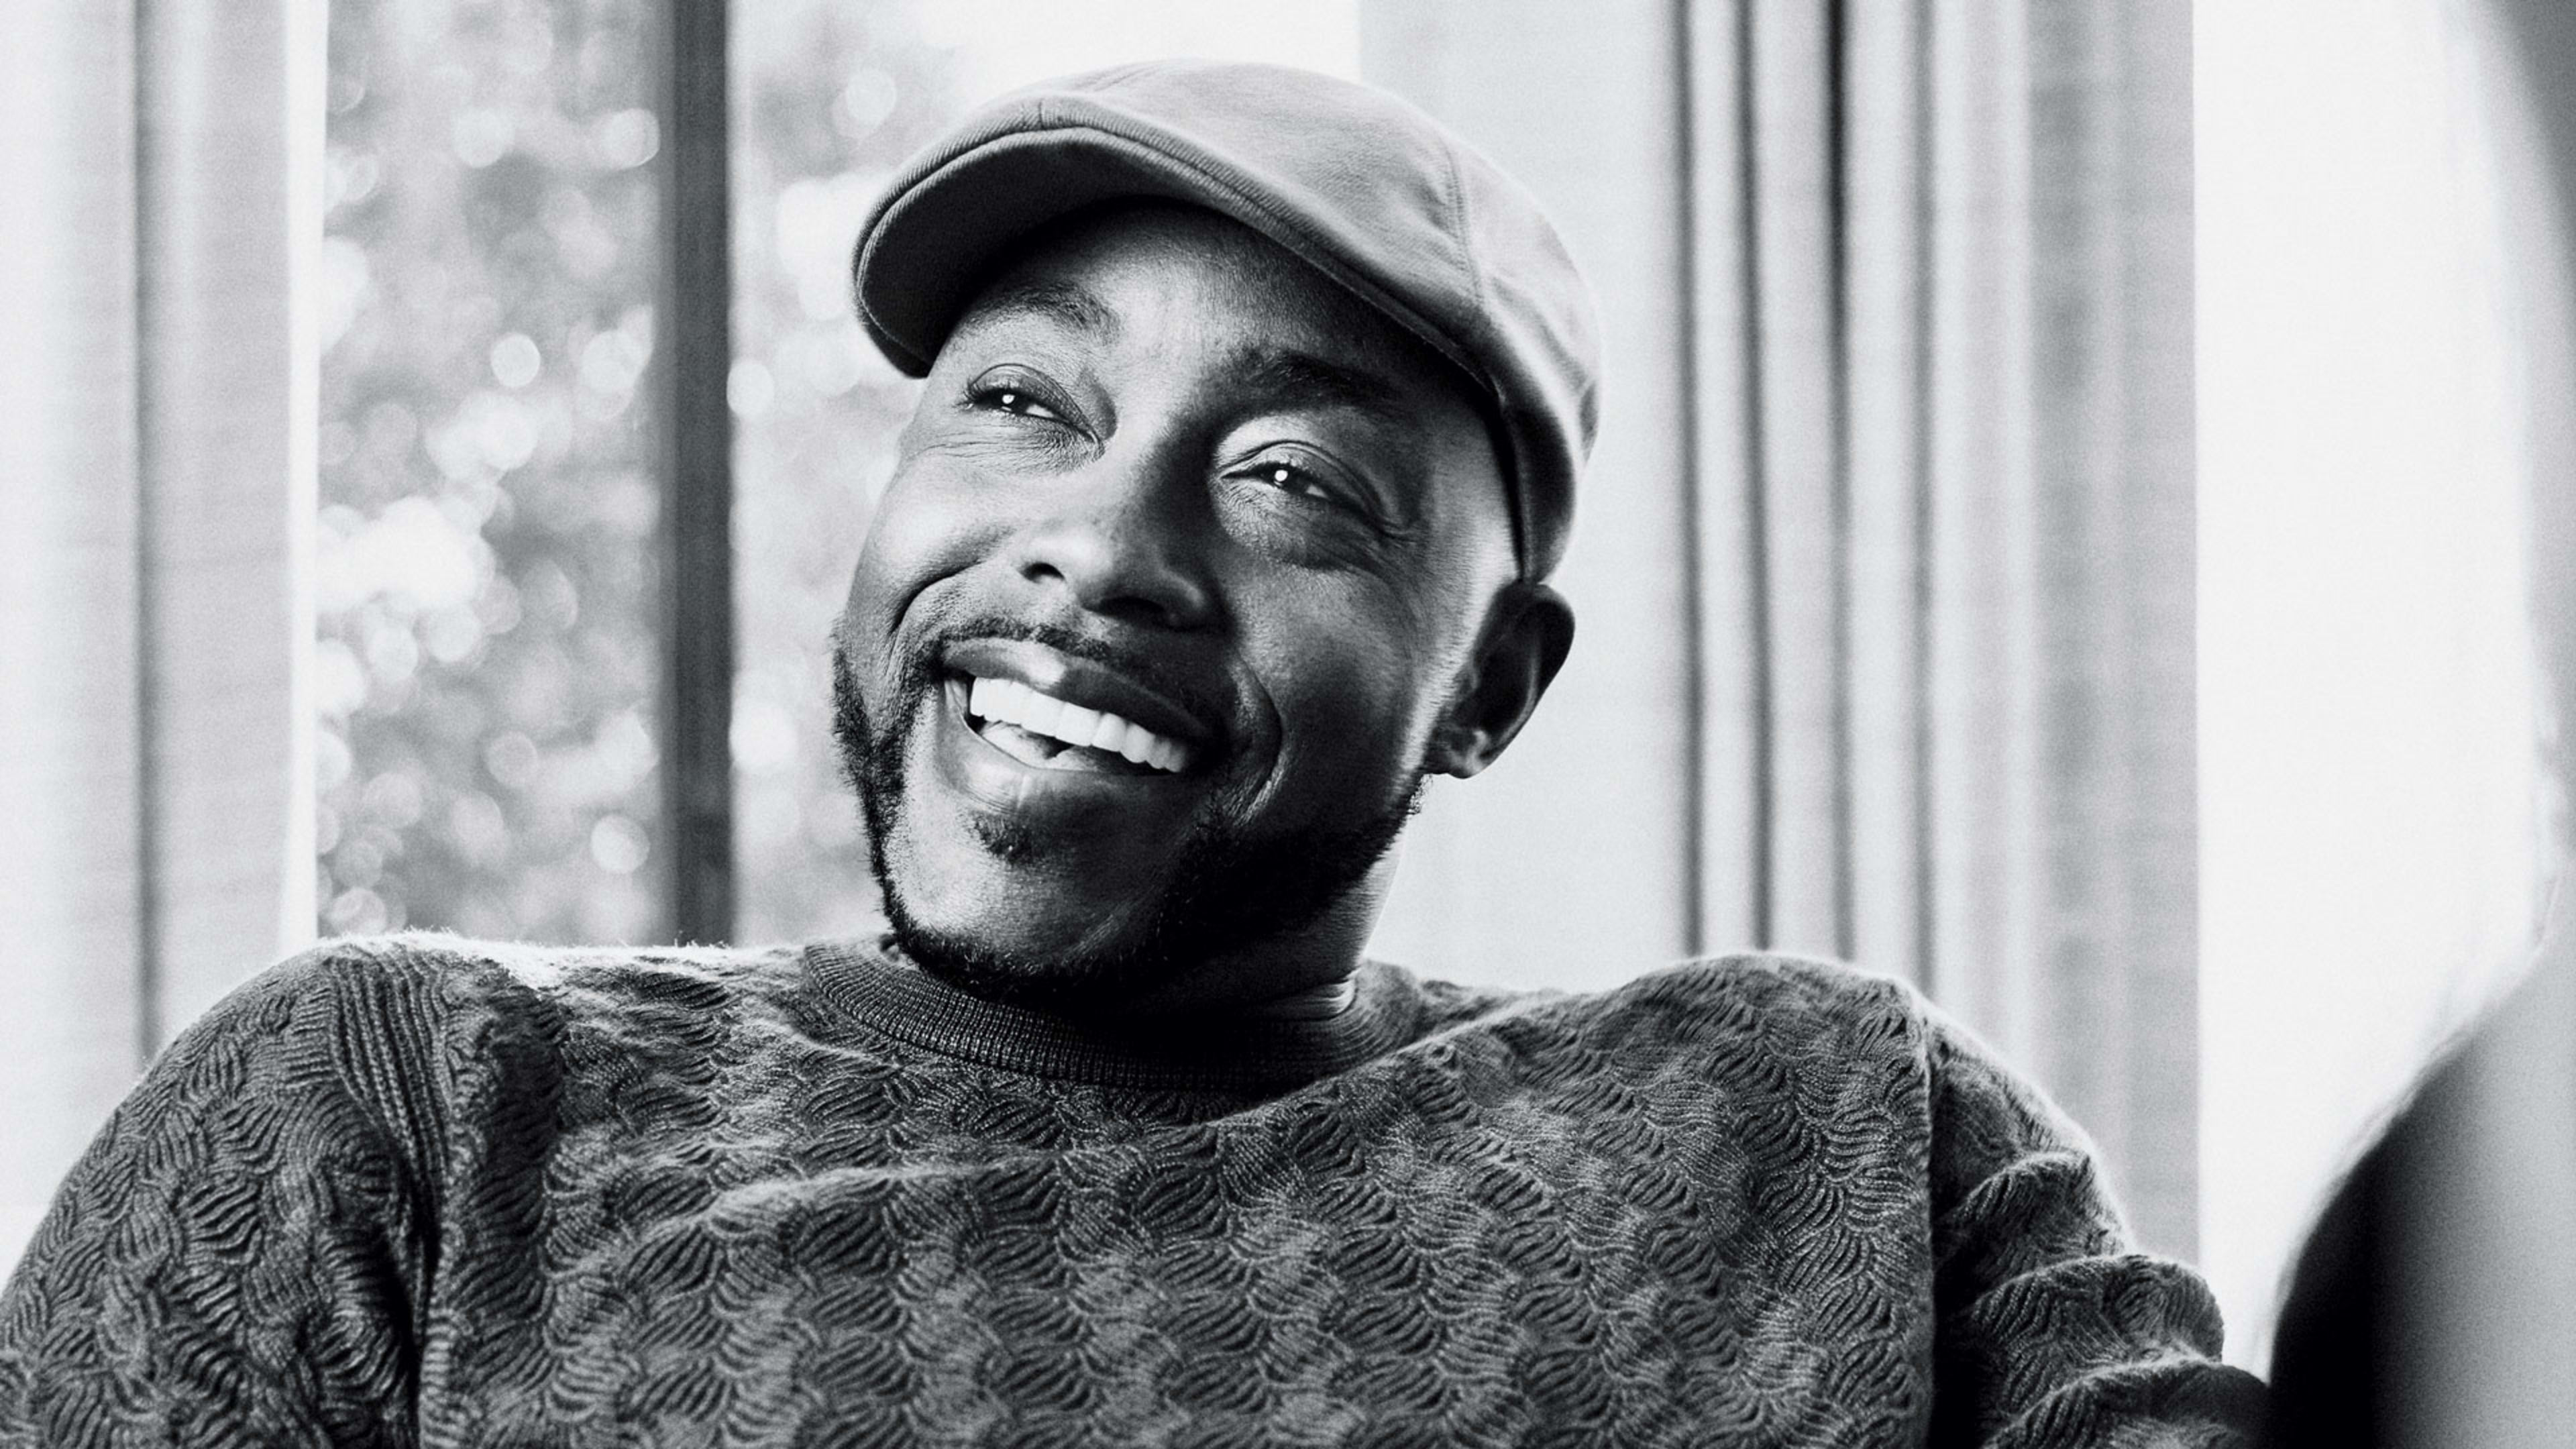 “Little” producer Will Packer on making entertainment for the “new American mainstream”